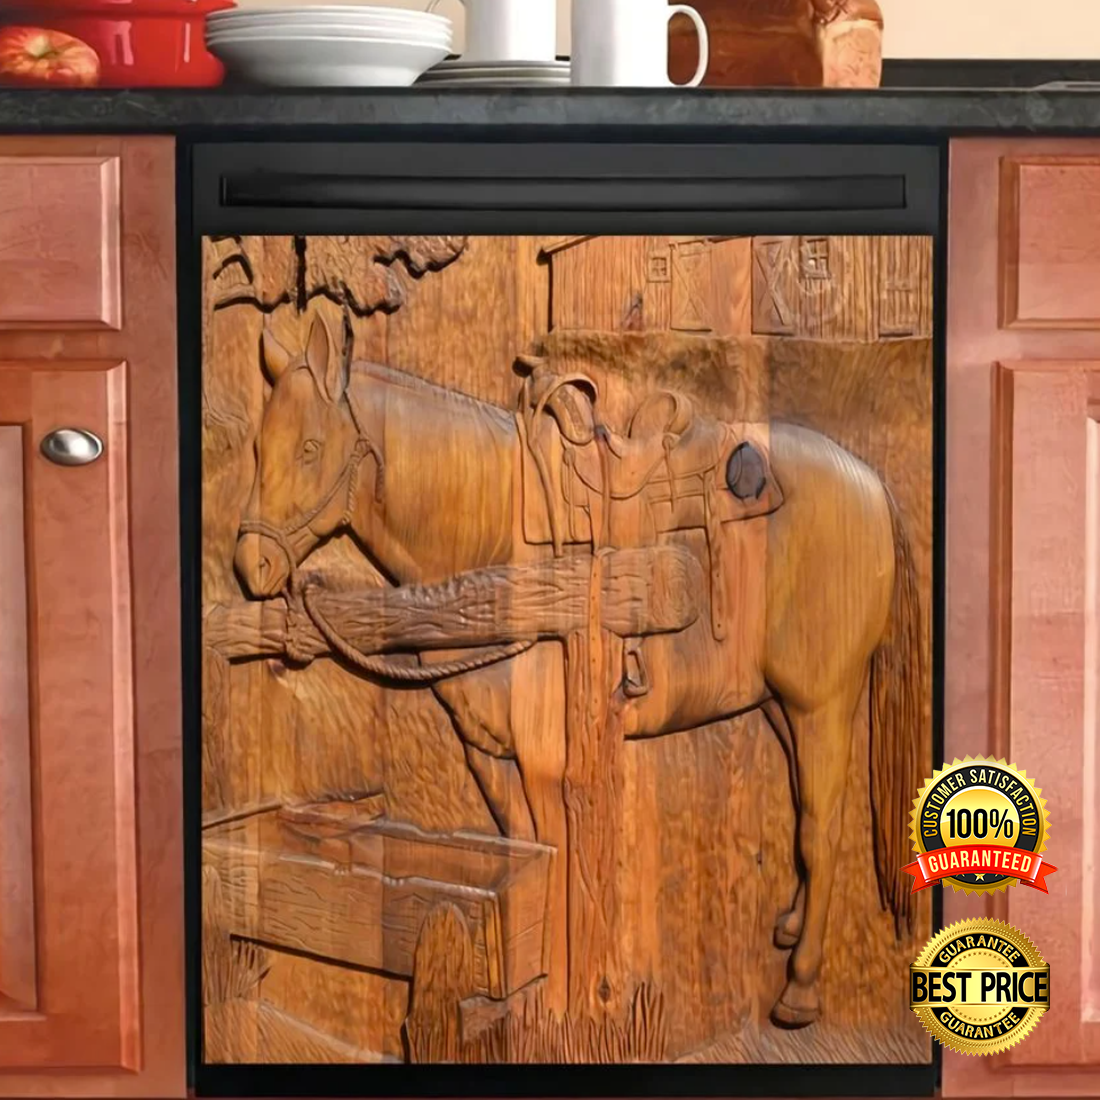 Wooden horse dishwasher cover